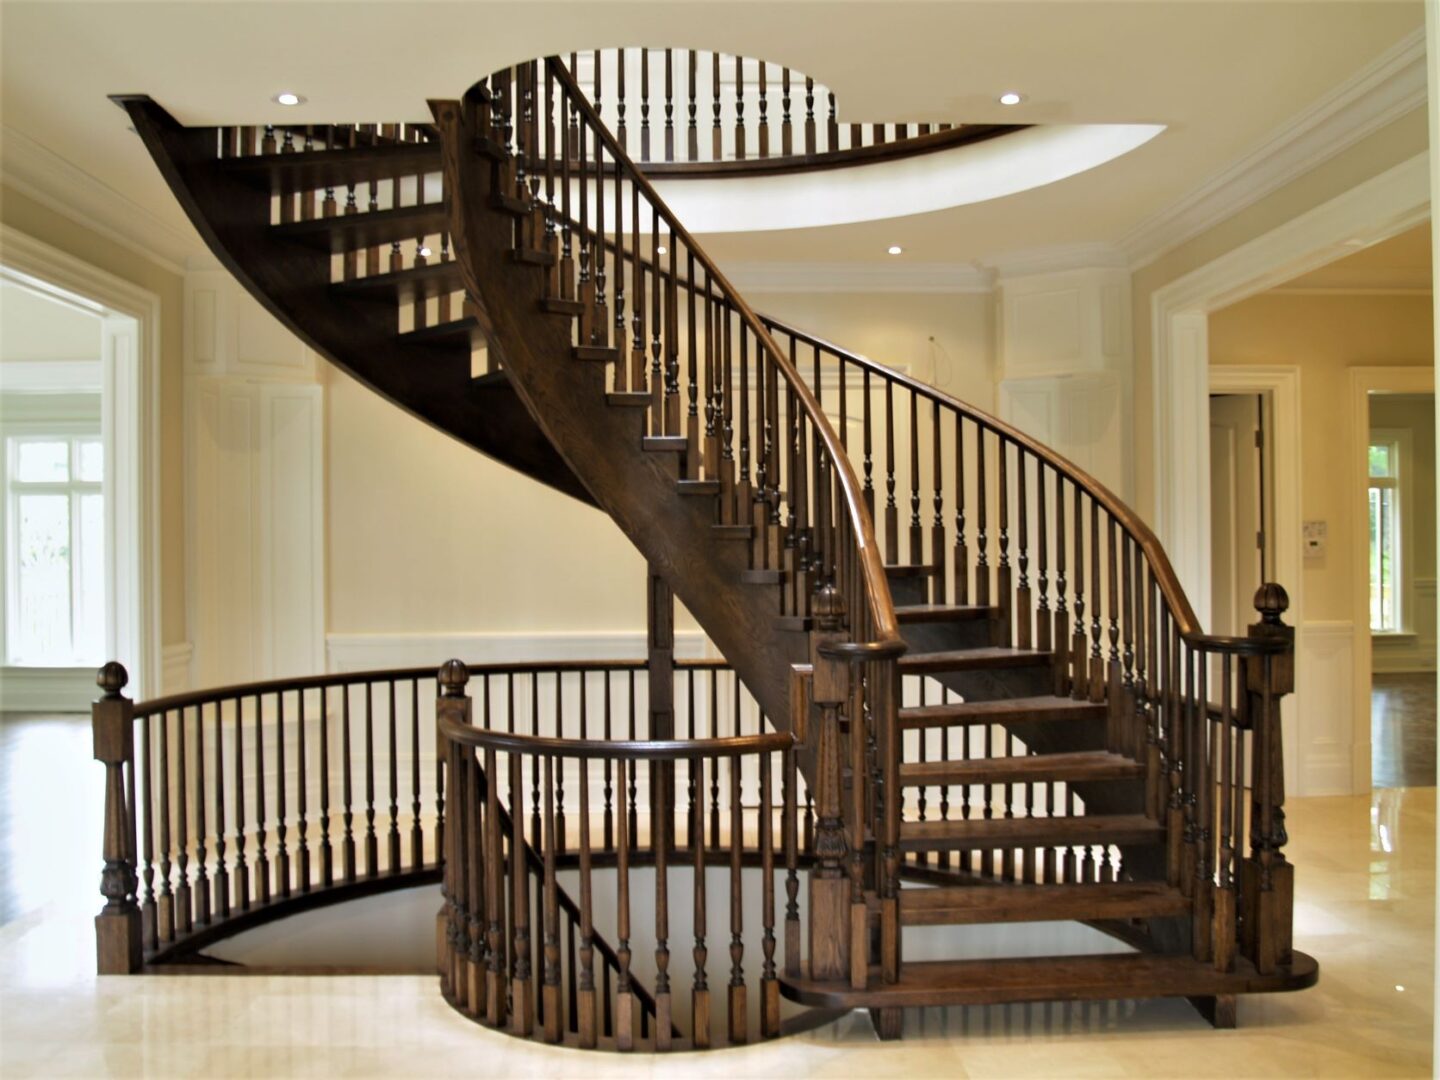 A Wooden Spiral Staircase Landing Image